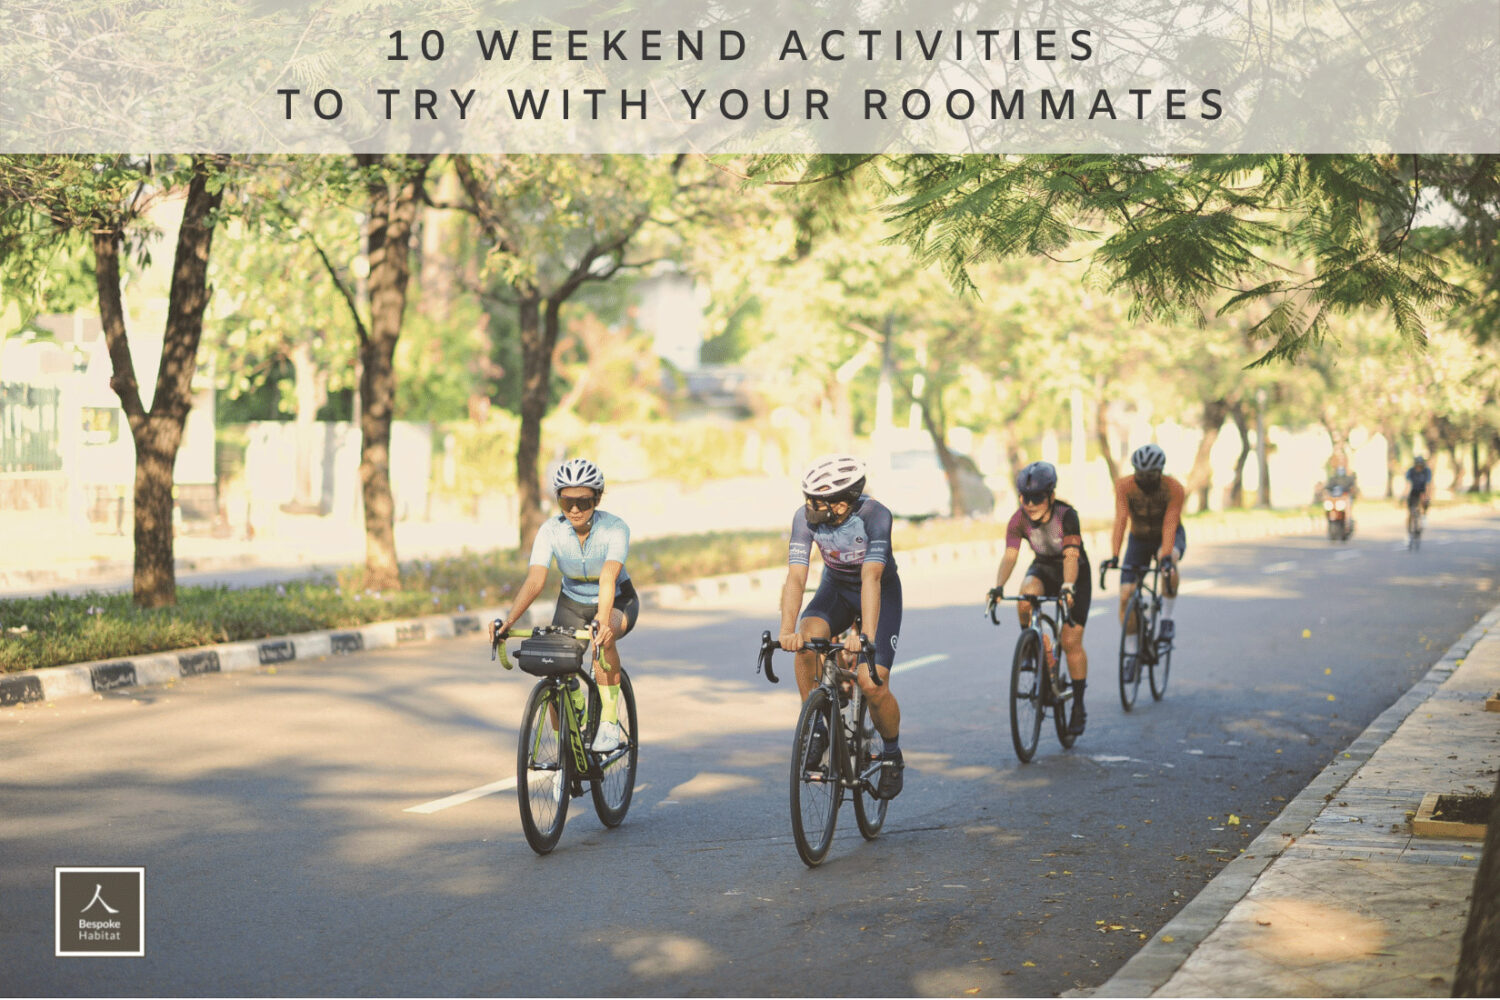 10 weekend activities to try with your roommates